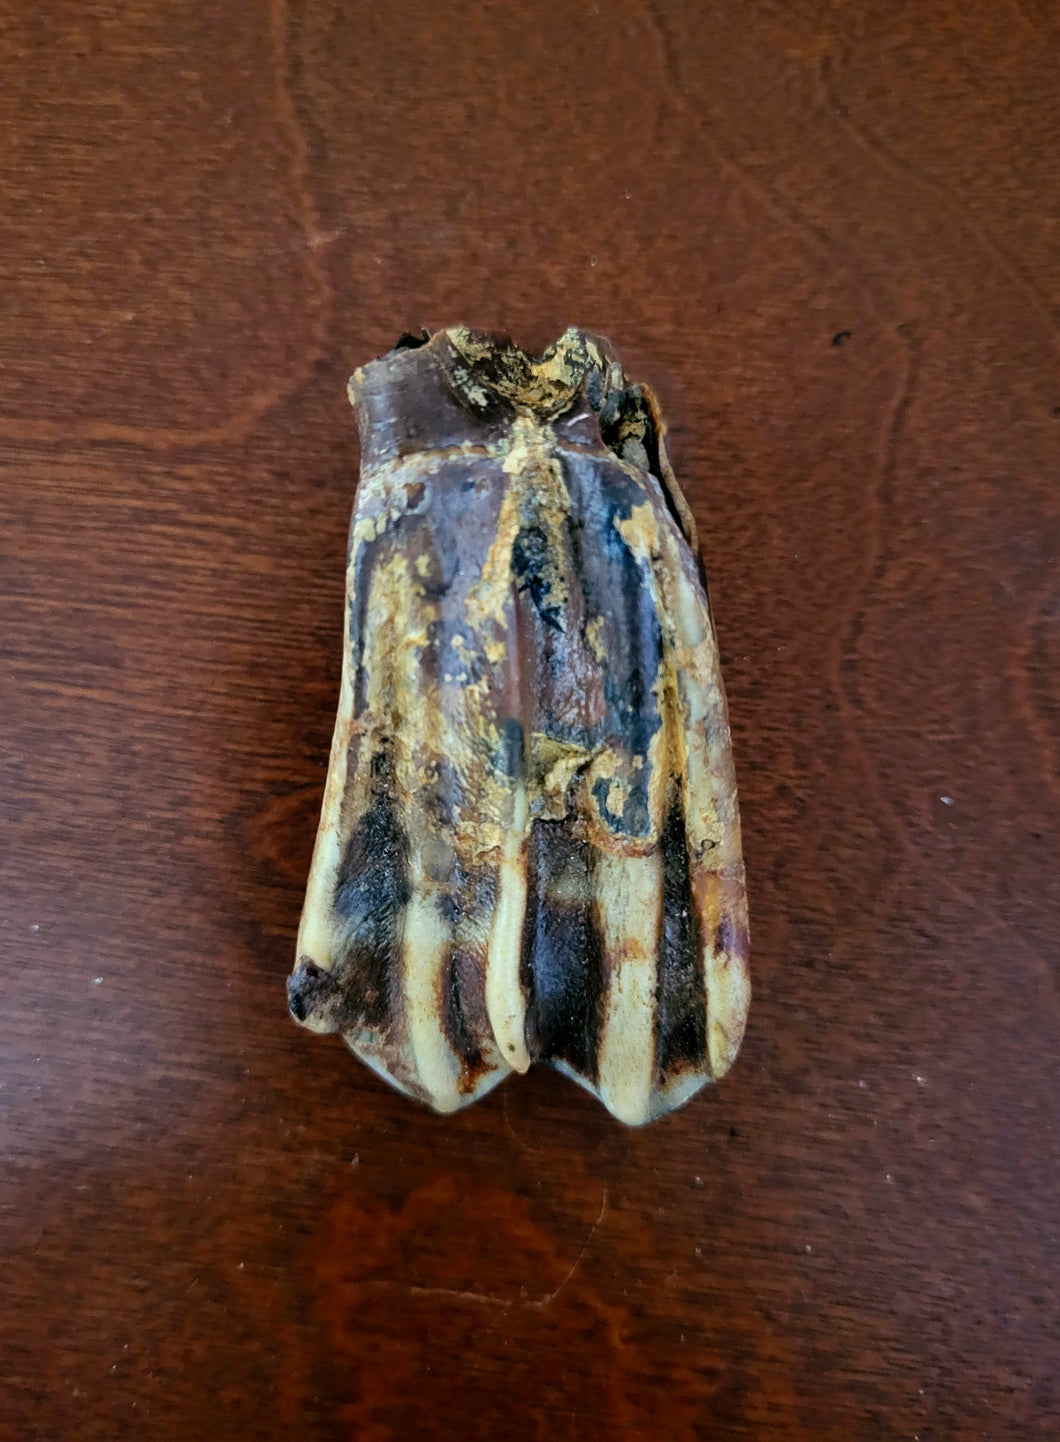 Fossilized Bison Tooth